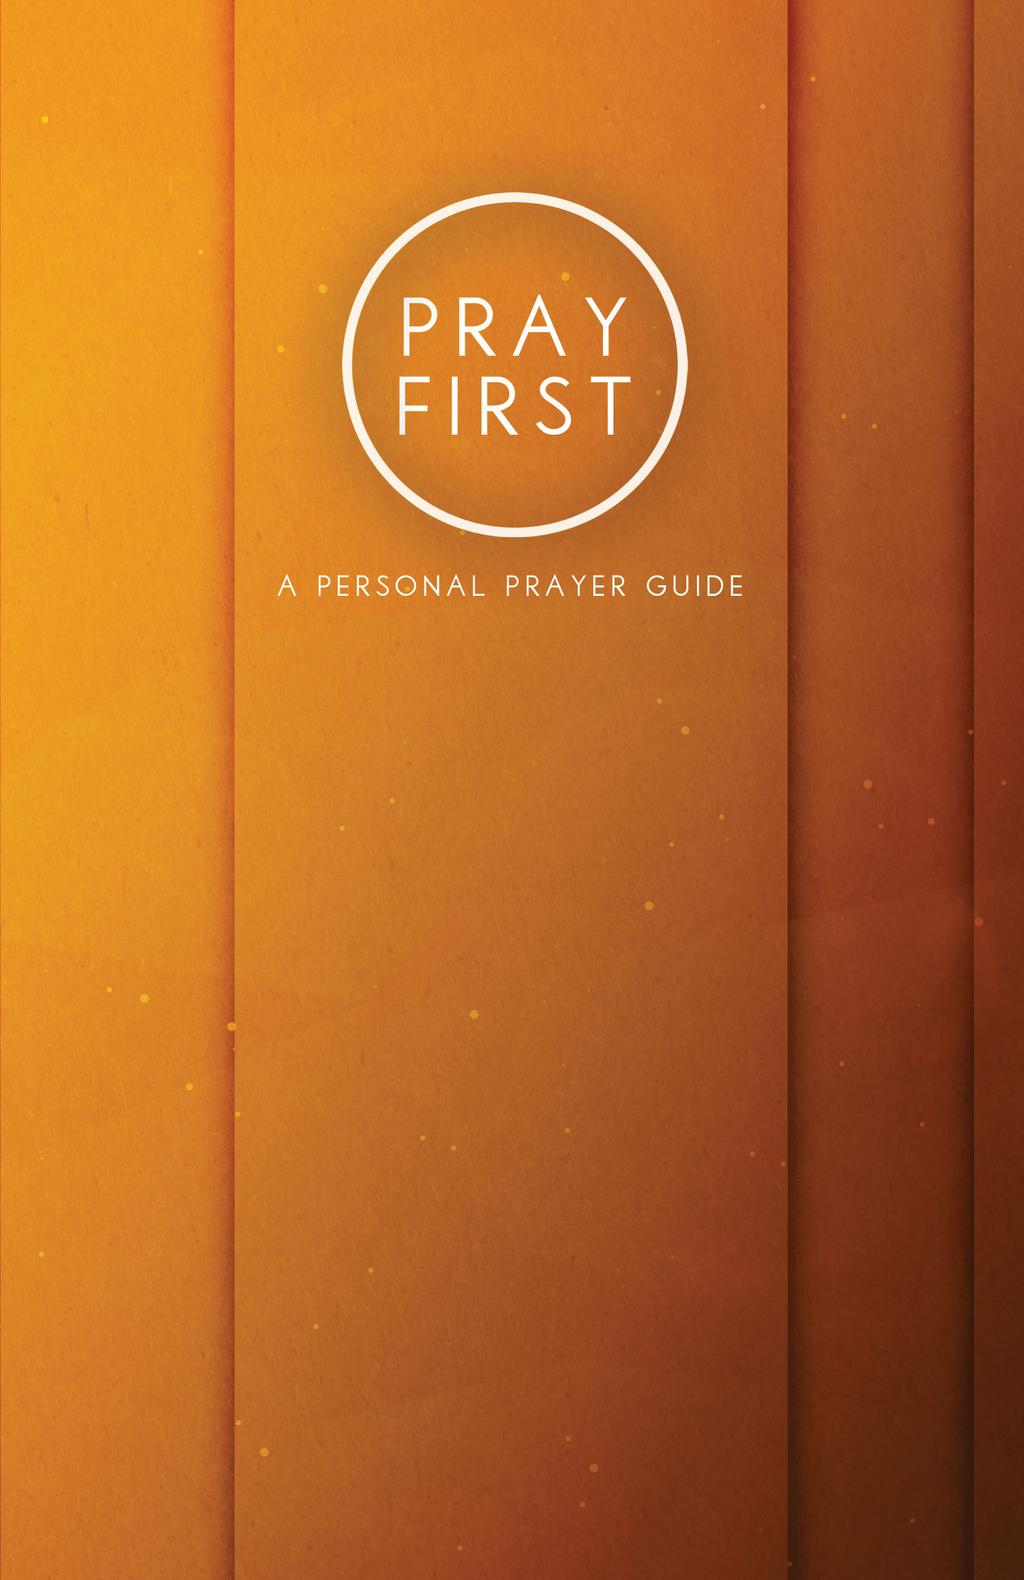 Please enjoy this simple, yet outstanding prayer guide to help you draw closer to God, establish a